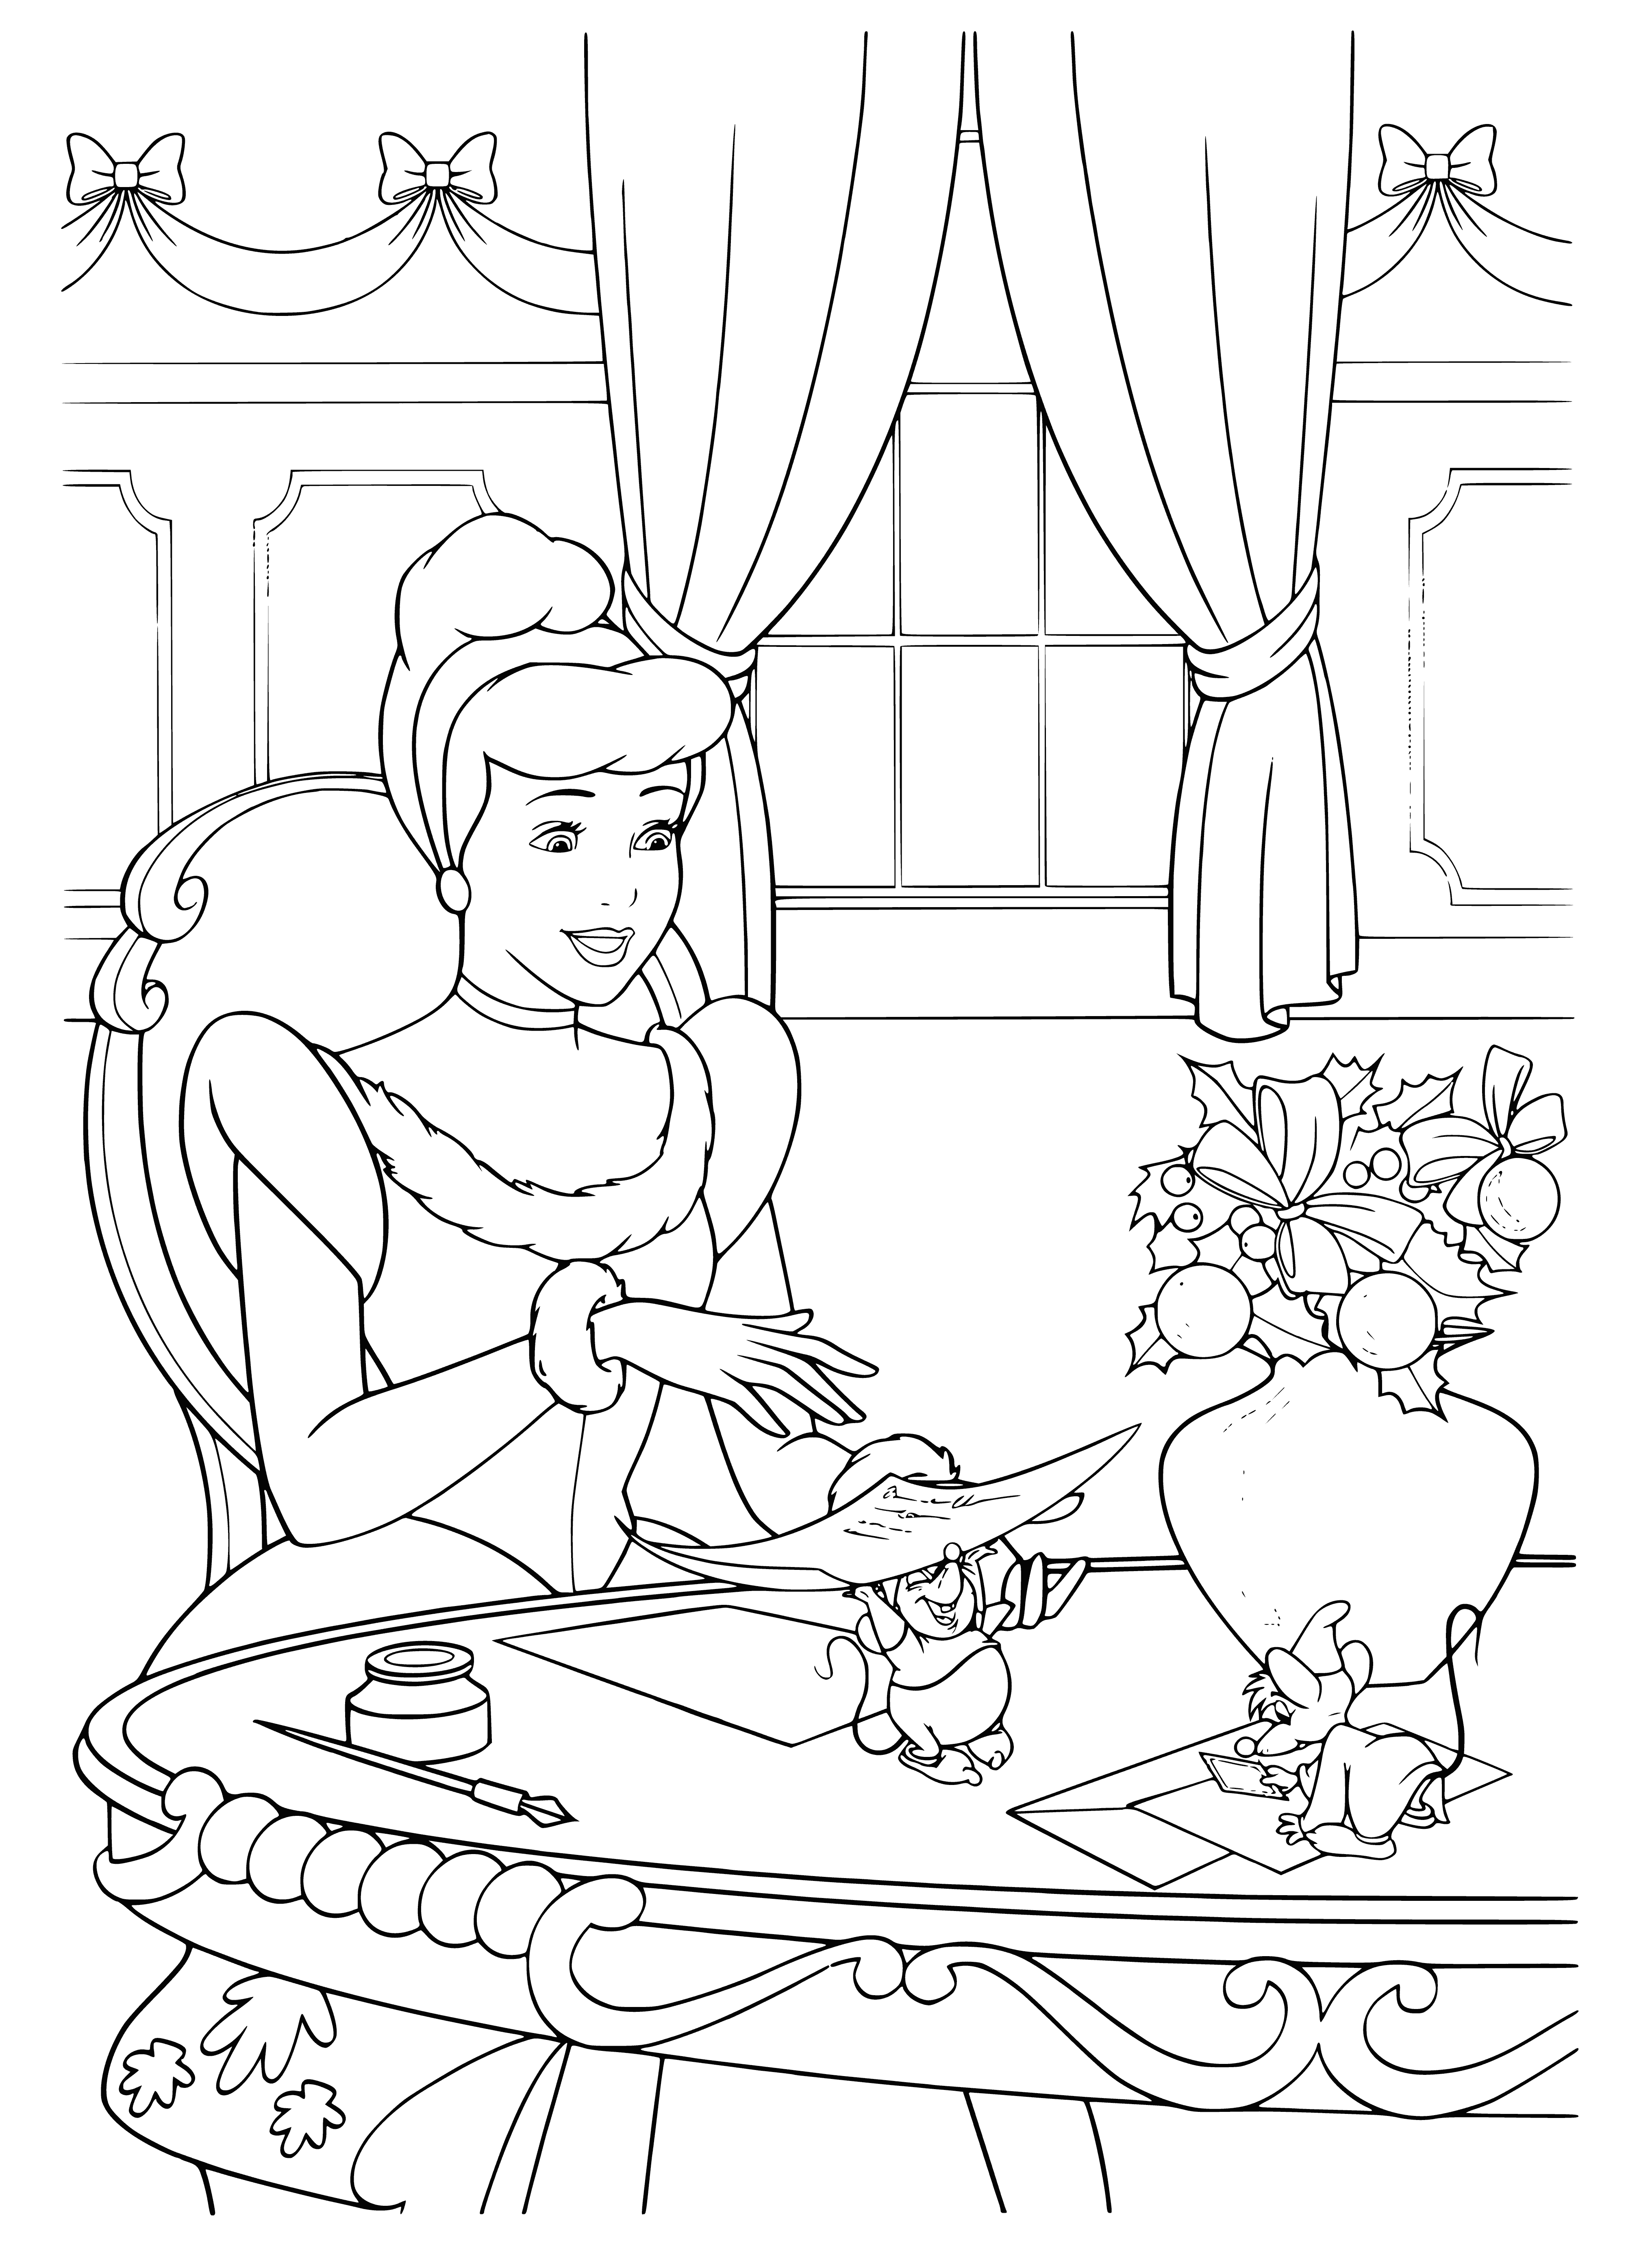 coloring page: Cinderella and the Disney princesses celebrate New Year by cleaning up castle. Wearing party hats, noisemakers and scrubbing the floors.